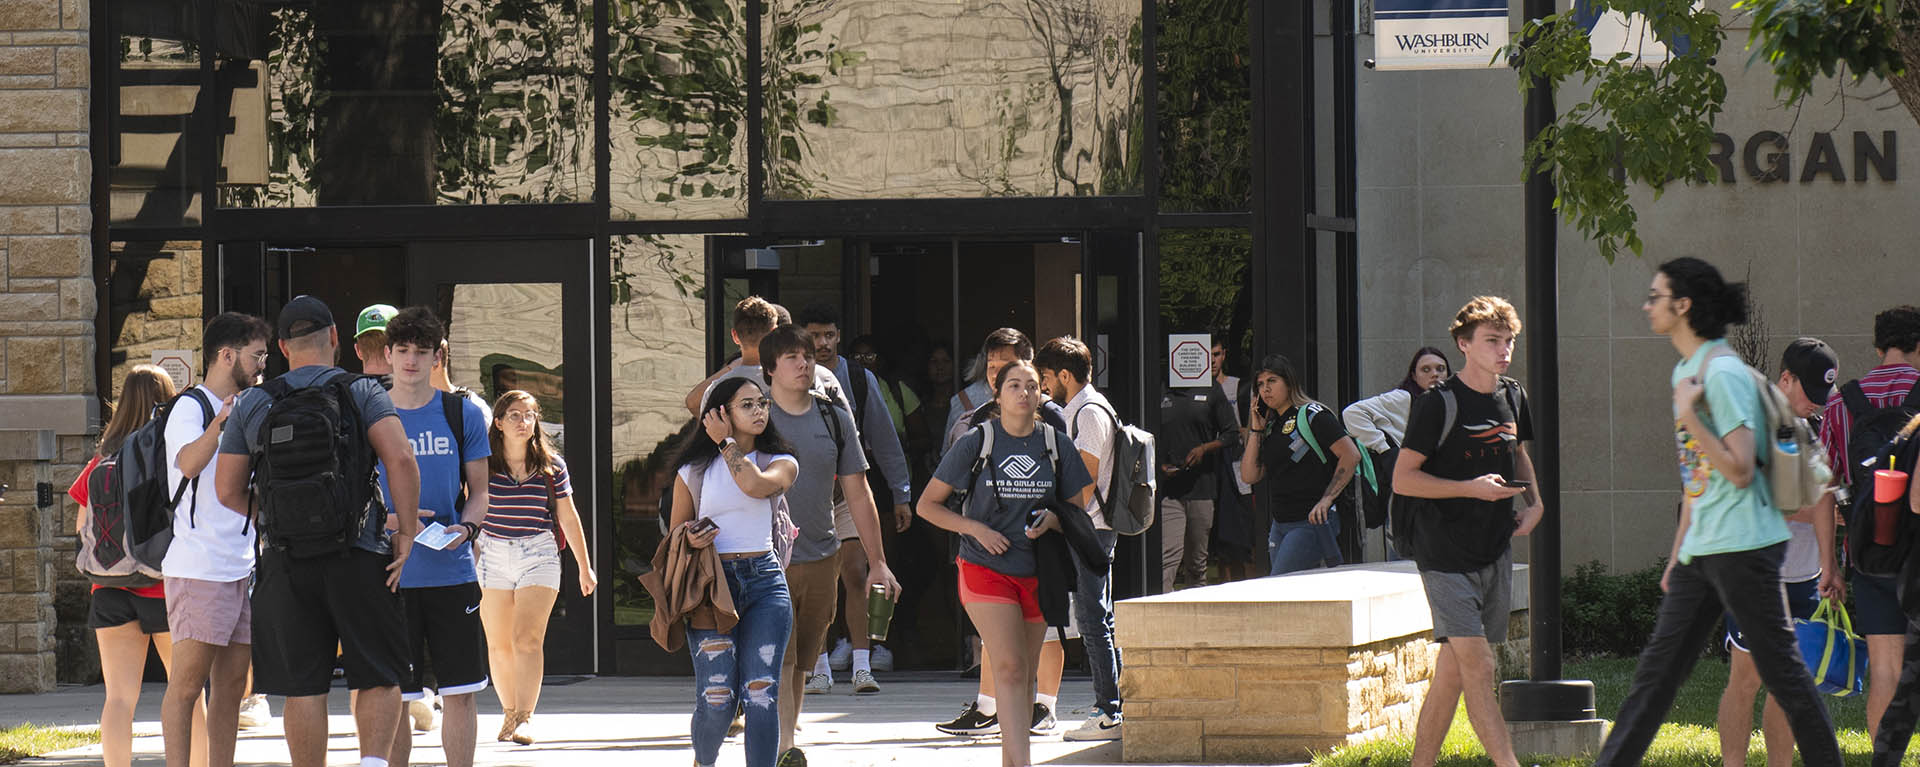 Students walking on campus outside of Morgan Hall.